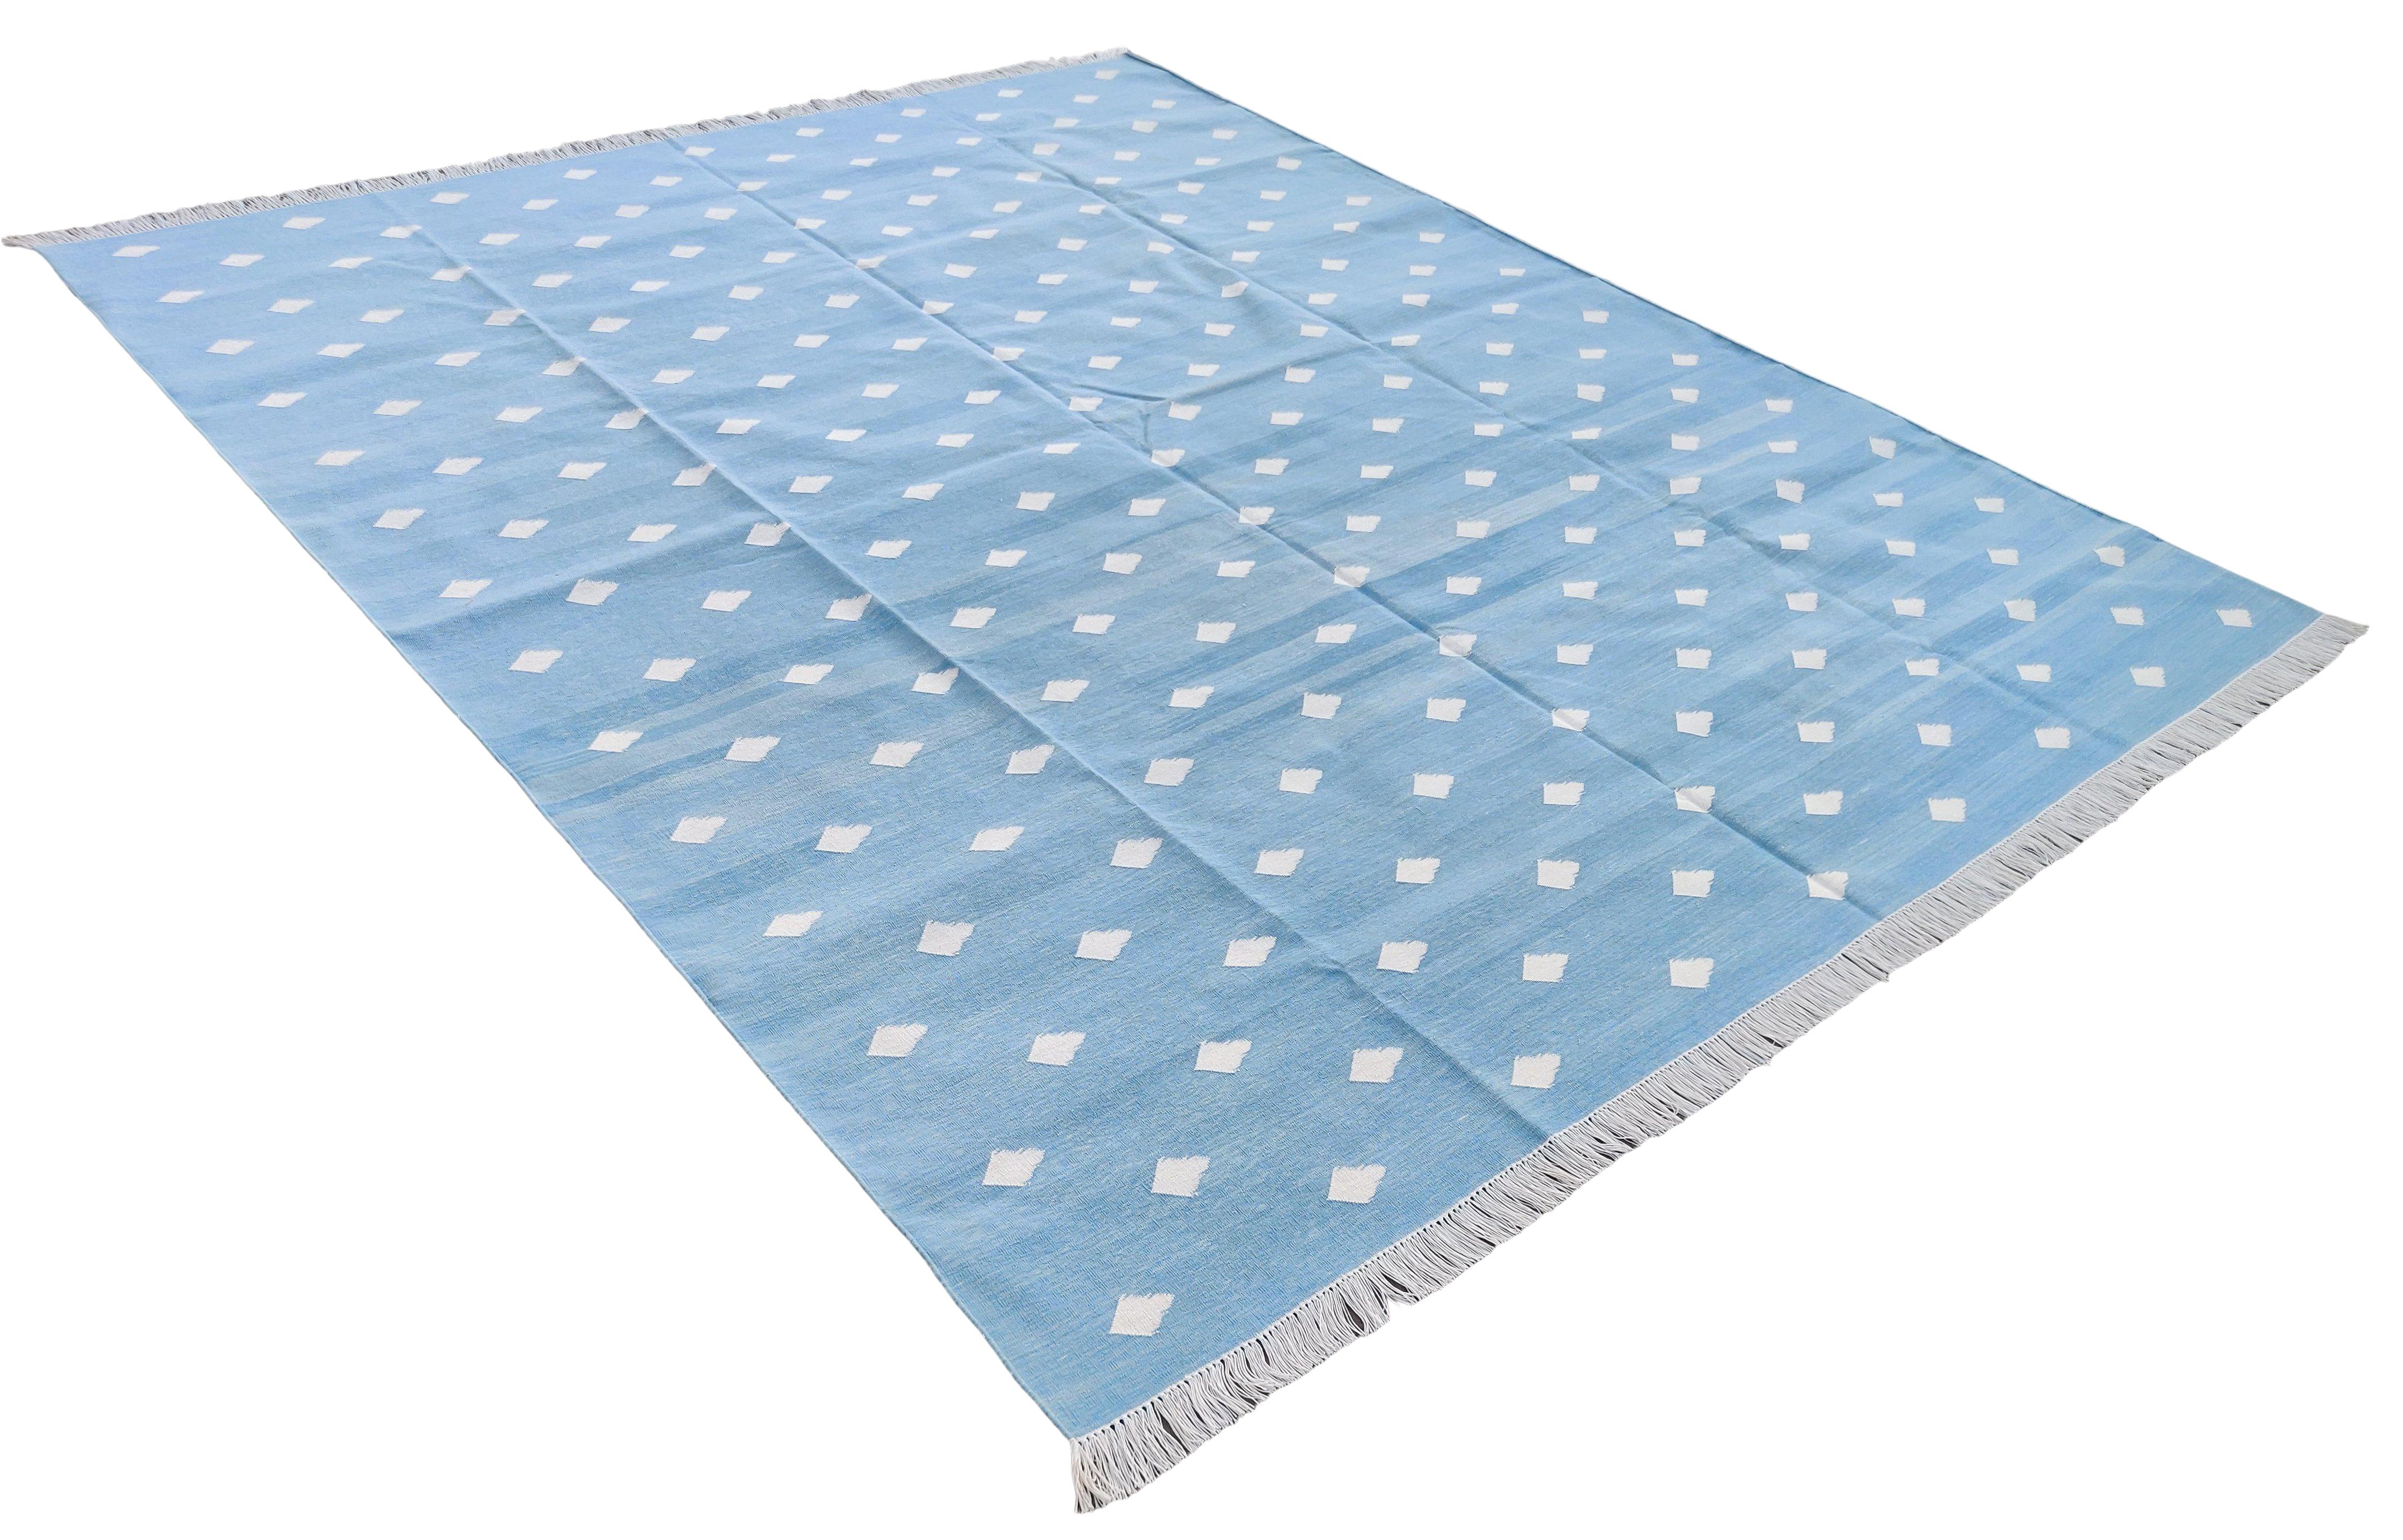 Cotton Natural Vegetable Dyed, Sky Blue & White Leaf Patterned Rug-8'x10'
These special flat-weave dhurries are hand-woven with 15 ply 100% cotton yarn. Due to the special manufacturing techniques used to create our rugs, the size and color of each